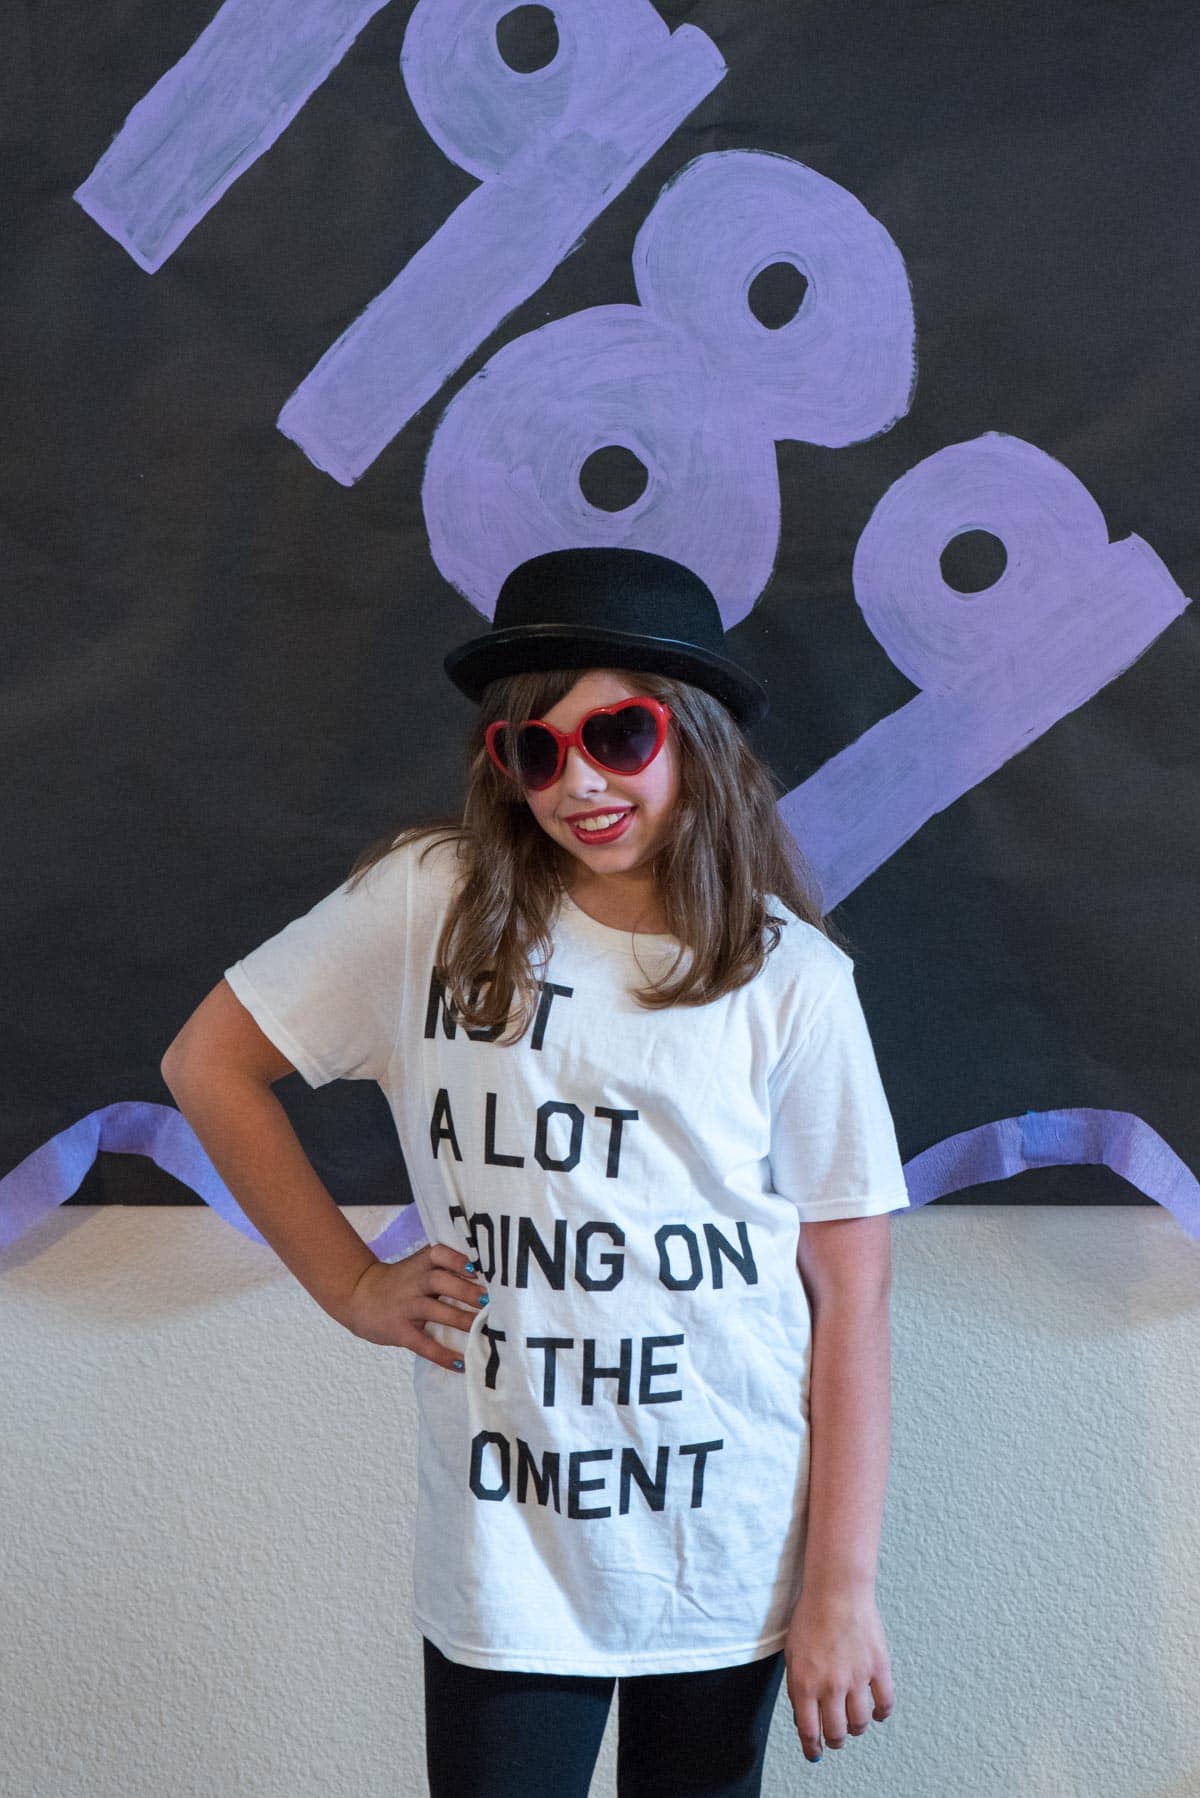 Taylor Swift Party outfit and photo backdrop - easy to put together and the kids will love it.